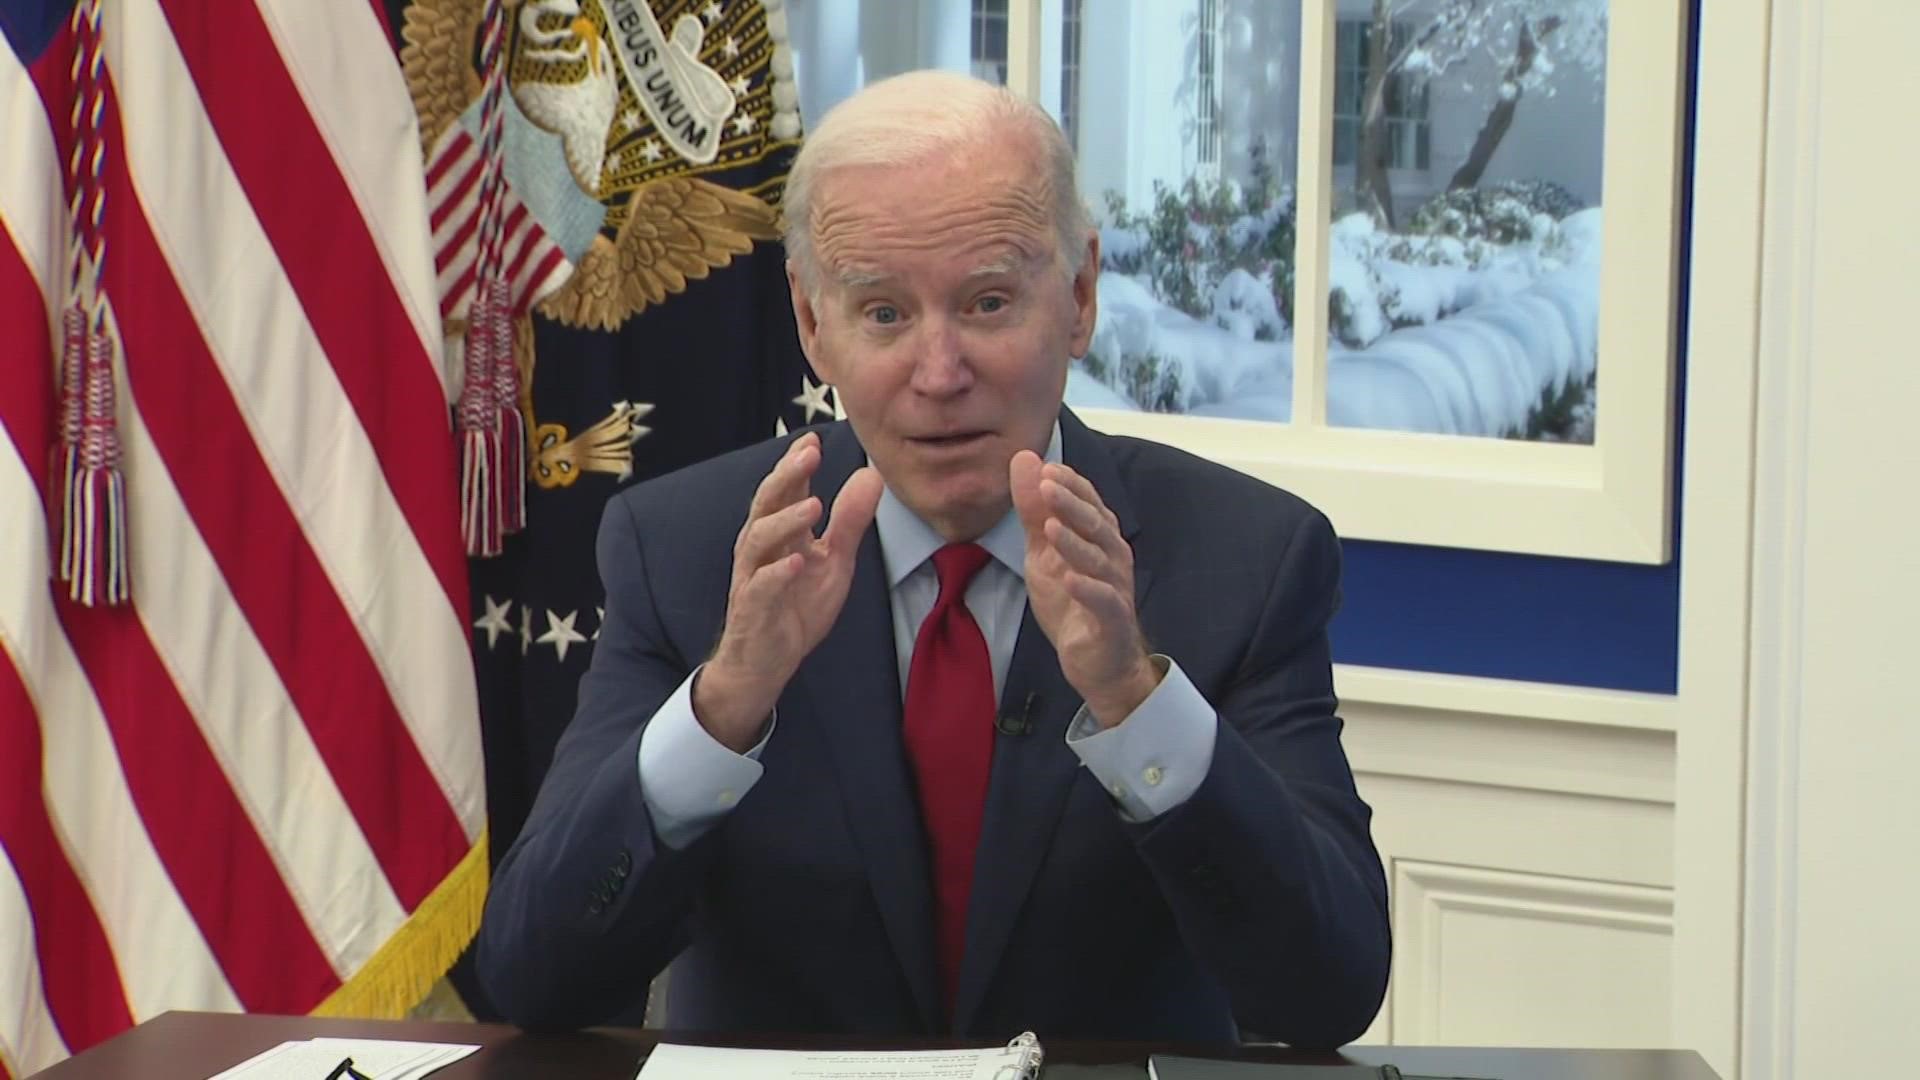 President Biden also mentioned the federal government will launch a website this month where you can get an at-home COVID test shipped to your home.